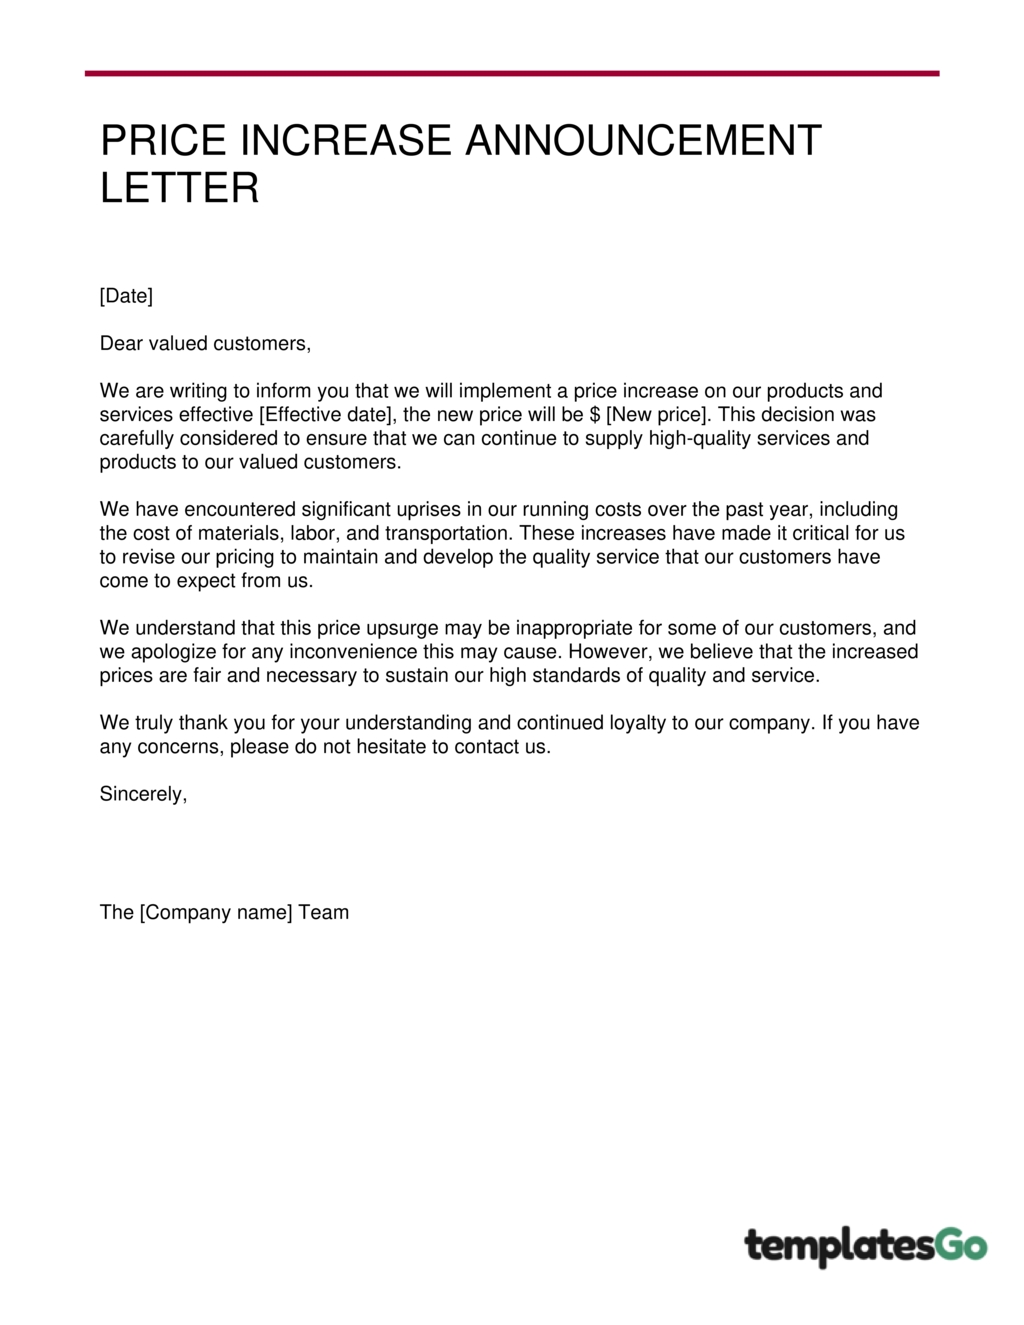 sample letter to inform customers of price increase